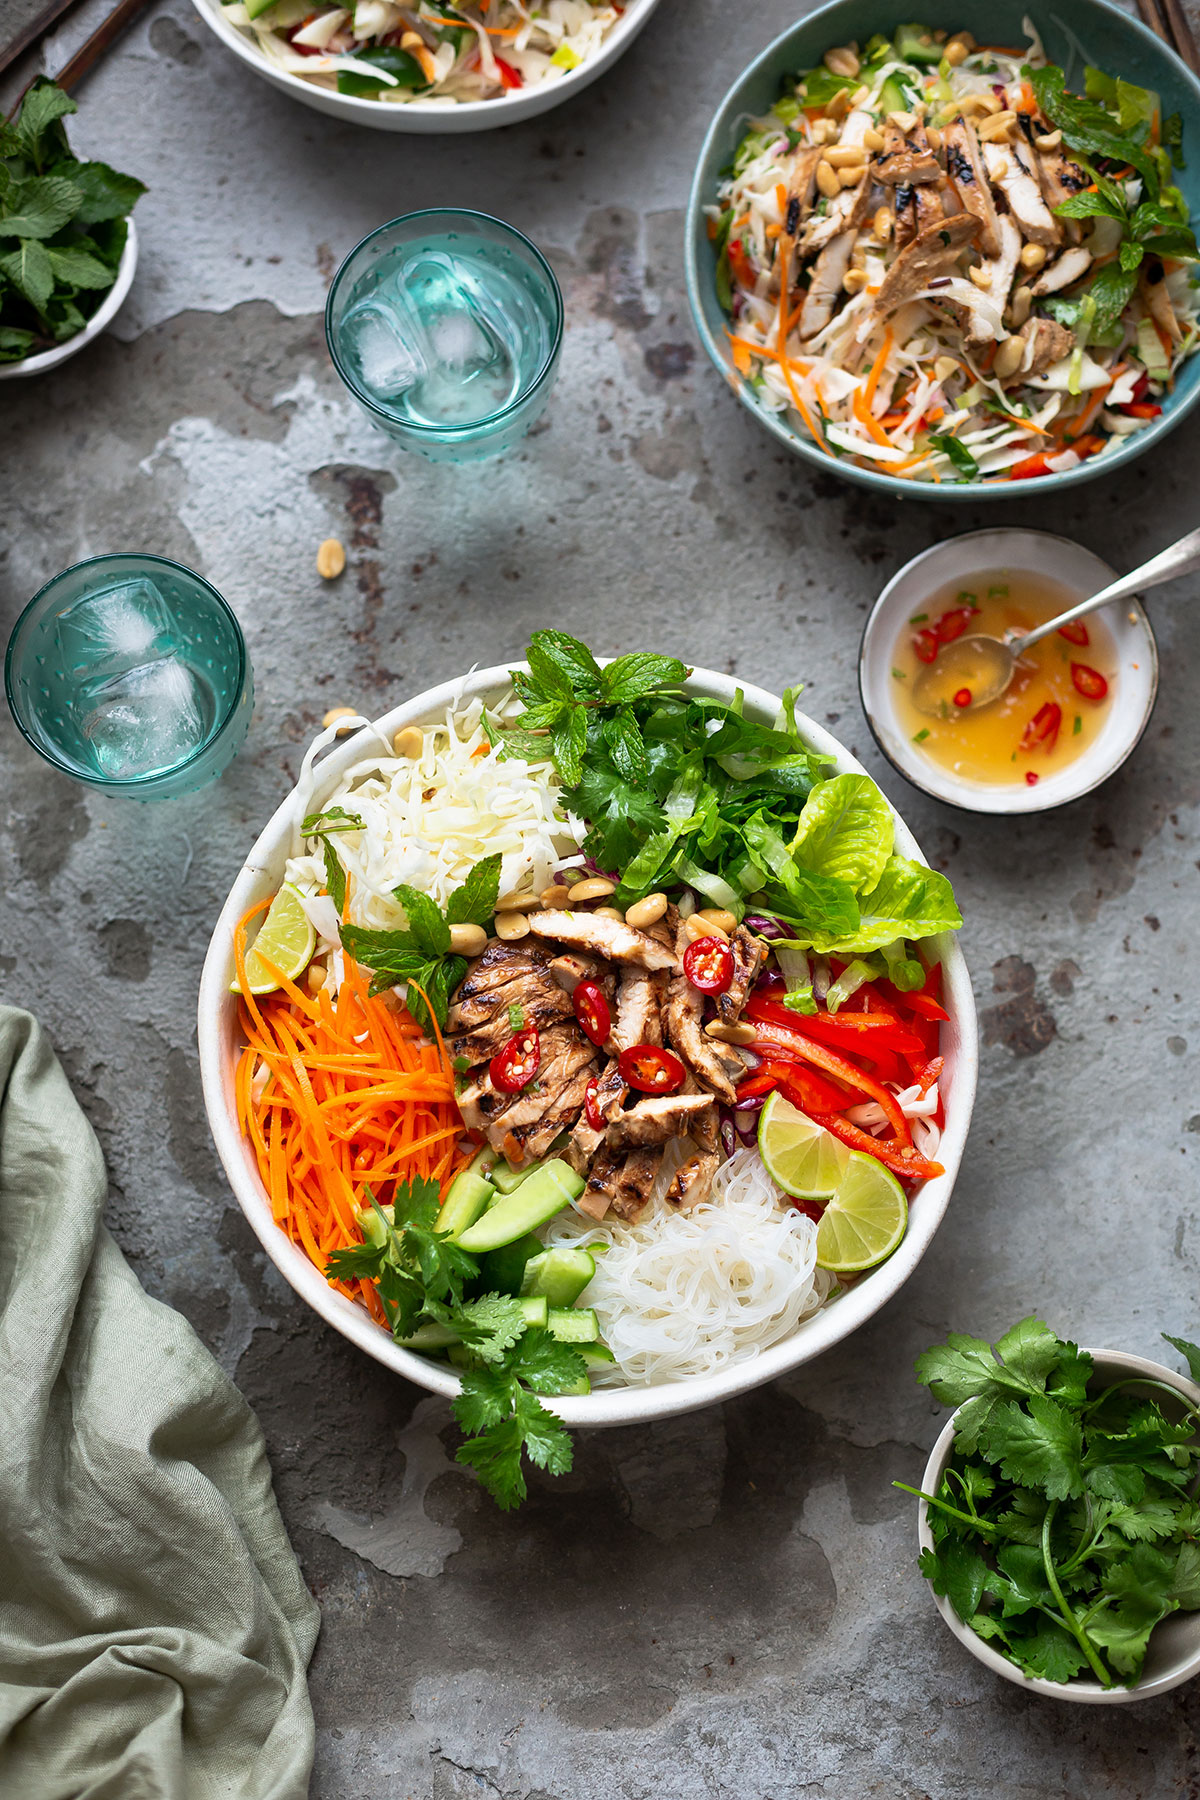 Vietnamese rice noodle salad with grilled chicken